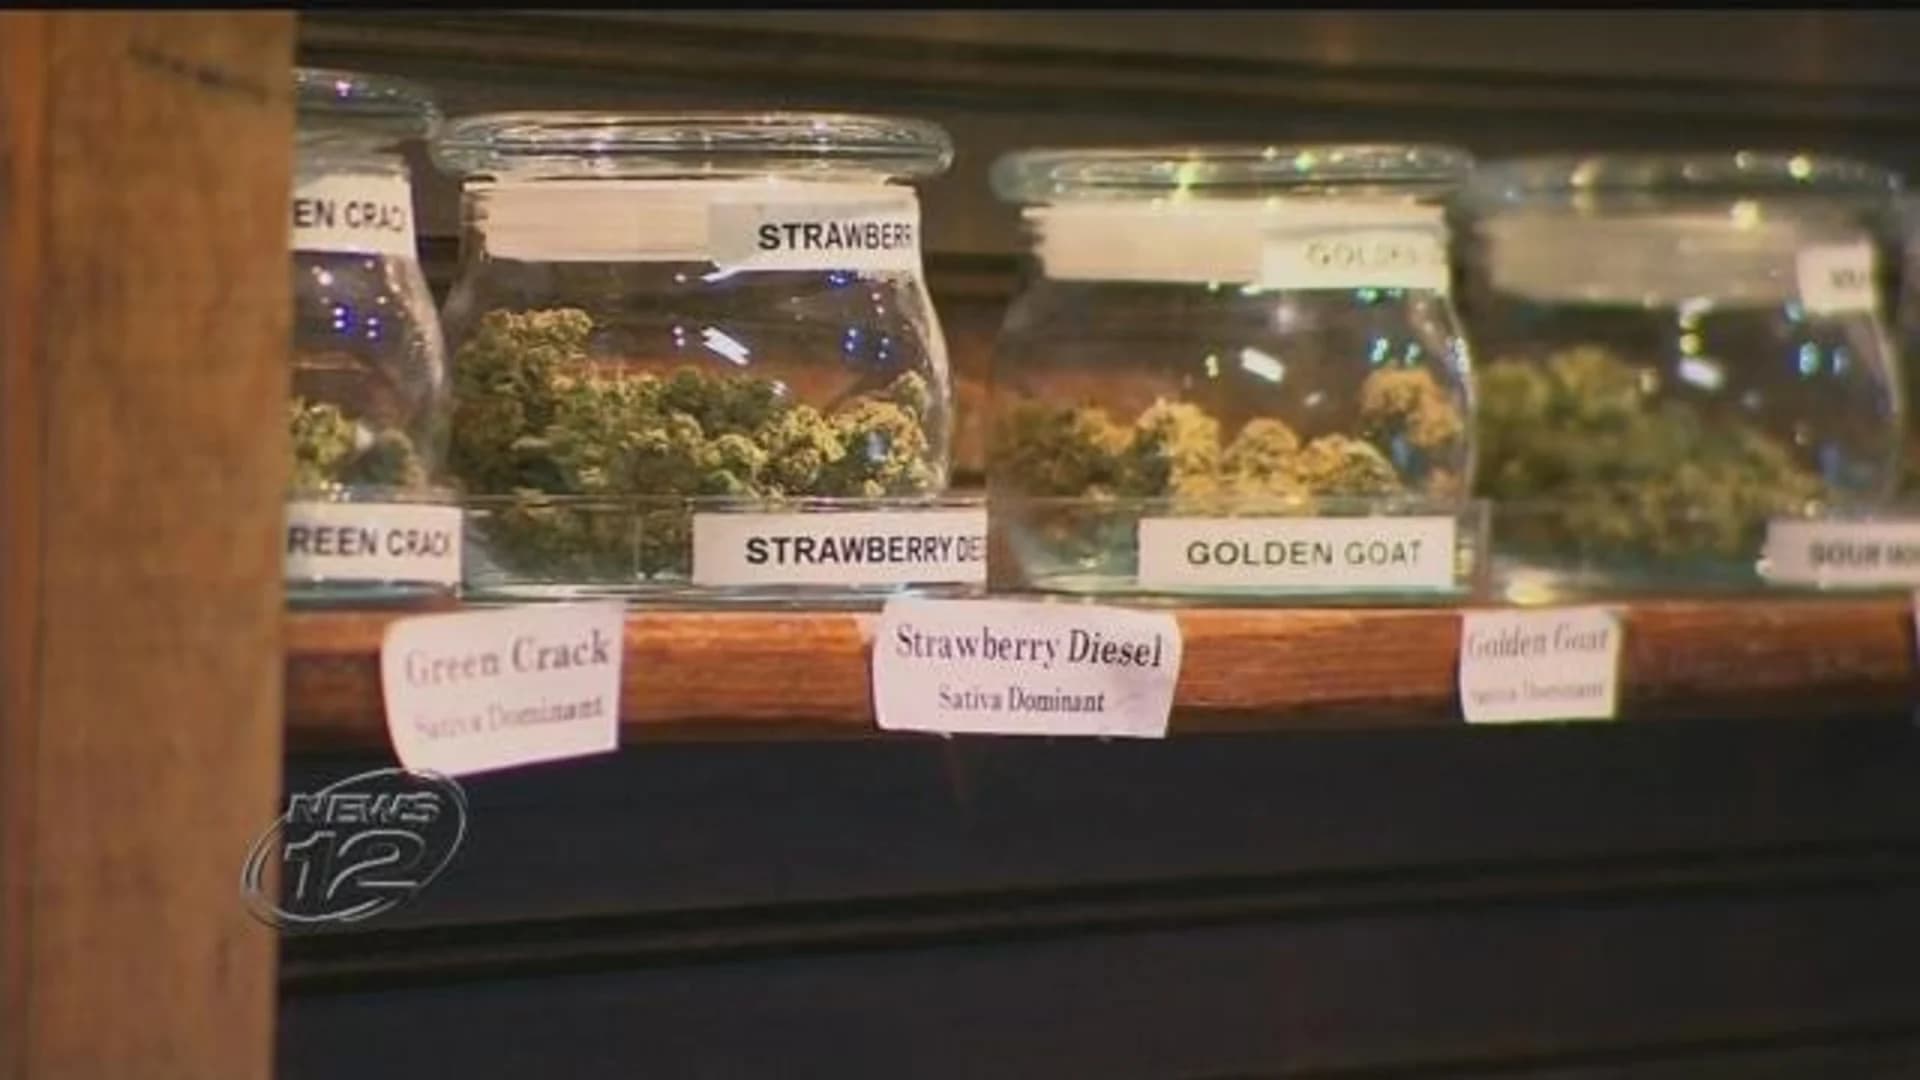 Nassau, Suffolk county executives plan to opt out if New York legalizes pot